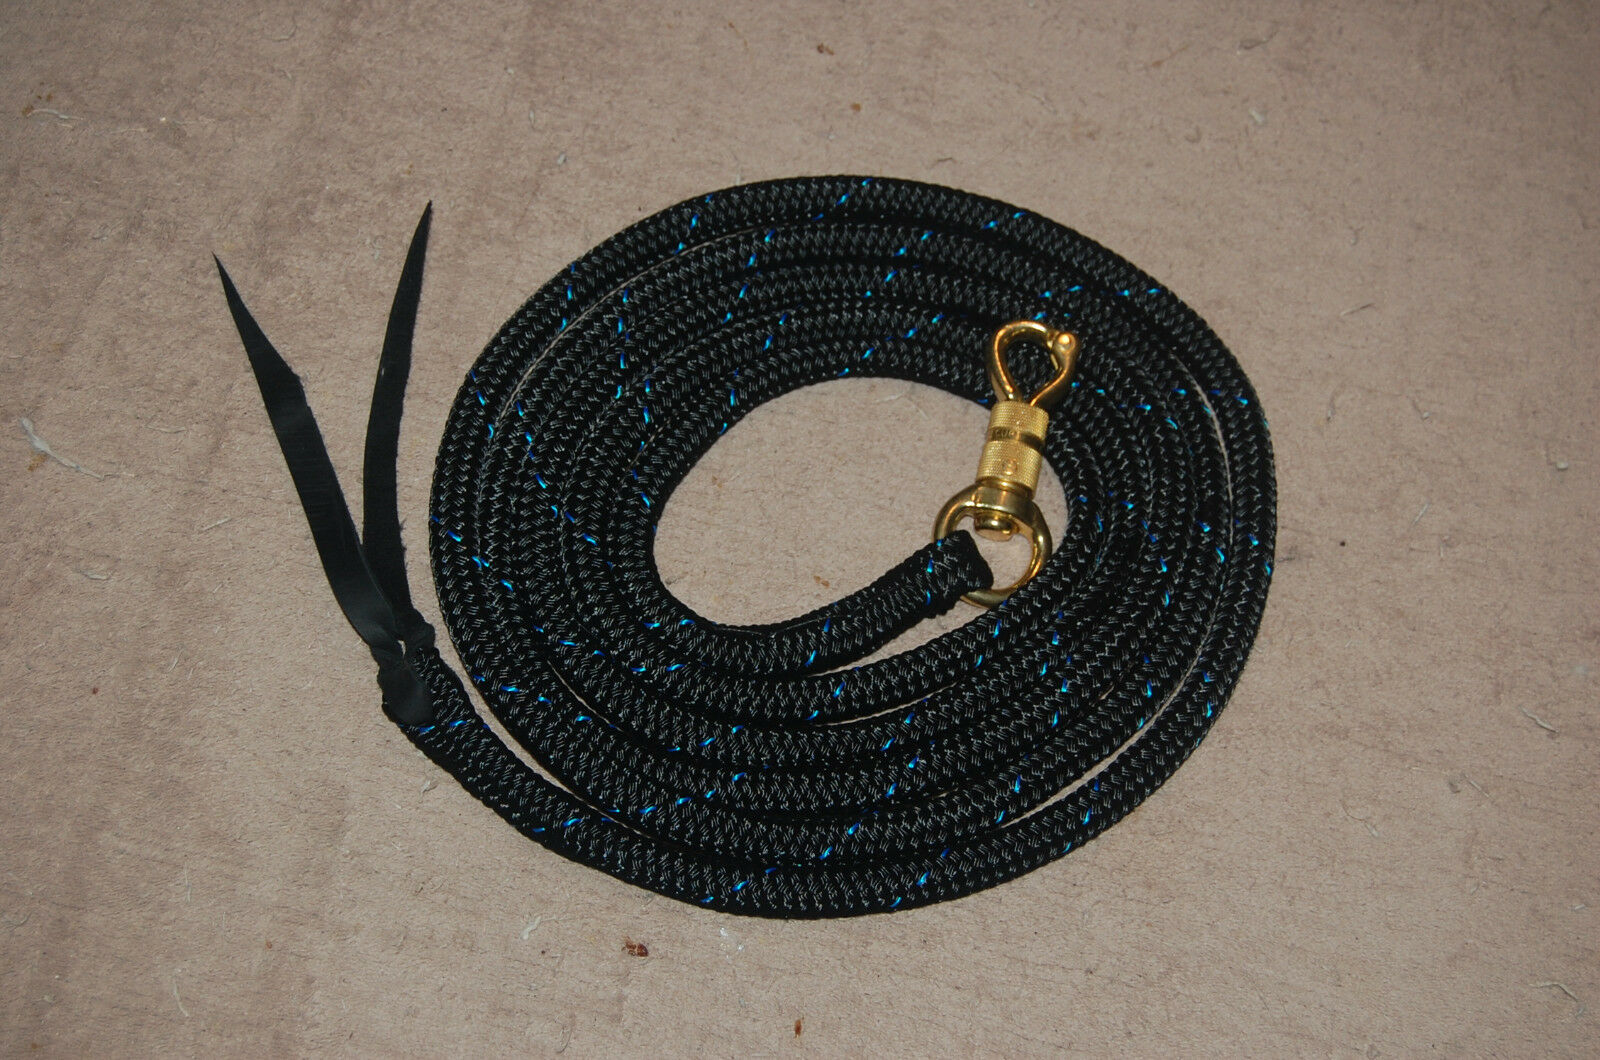 12' Lead Rope W/ Parelli Snap For Natural Horse Training, Many Colors Available!